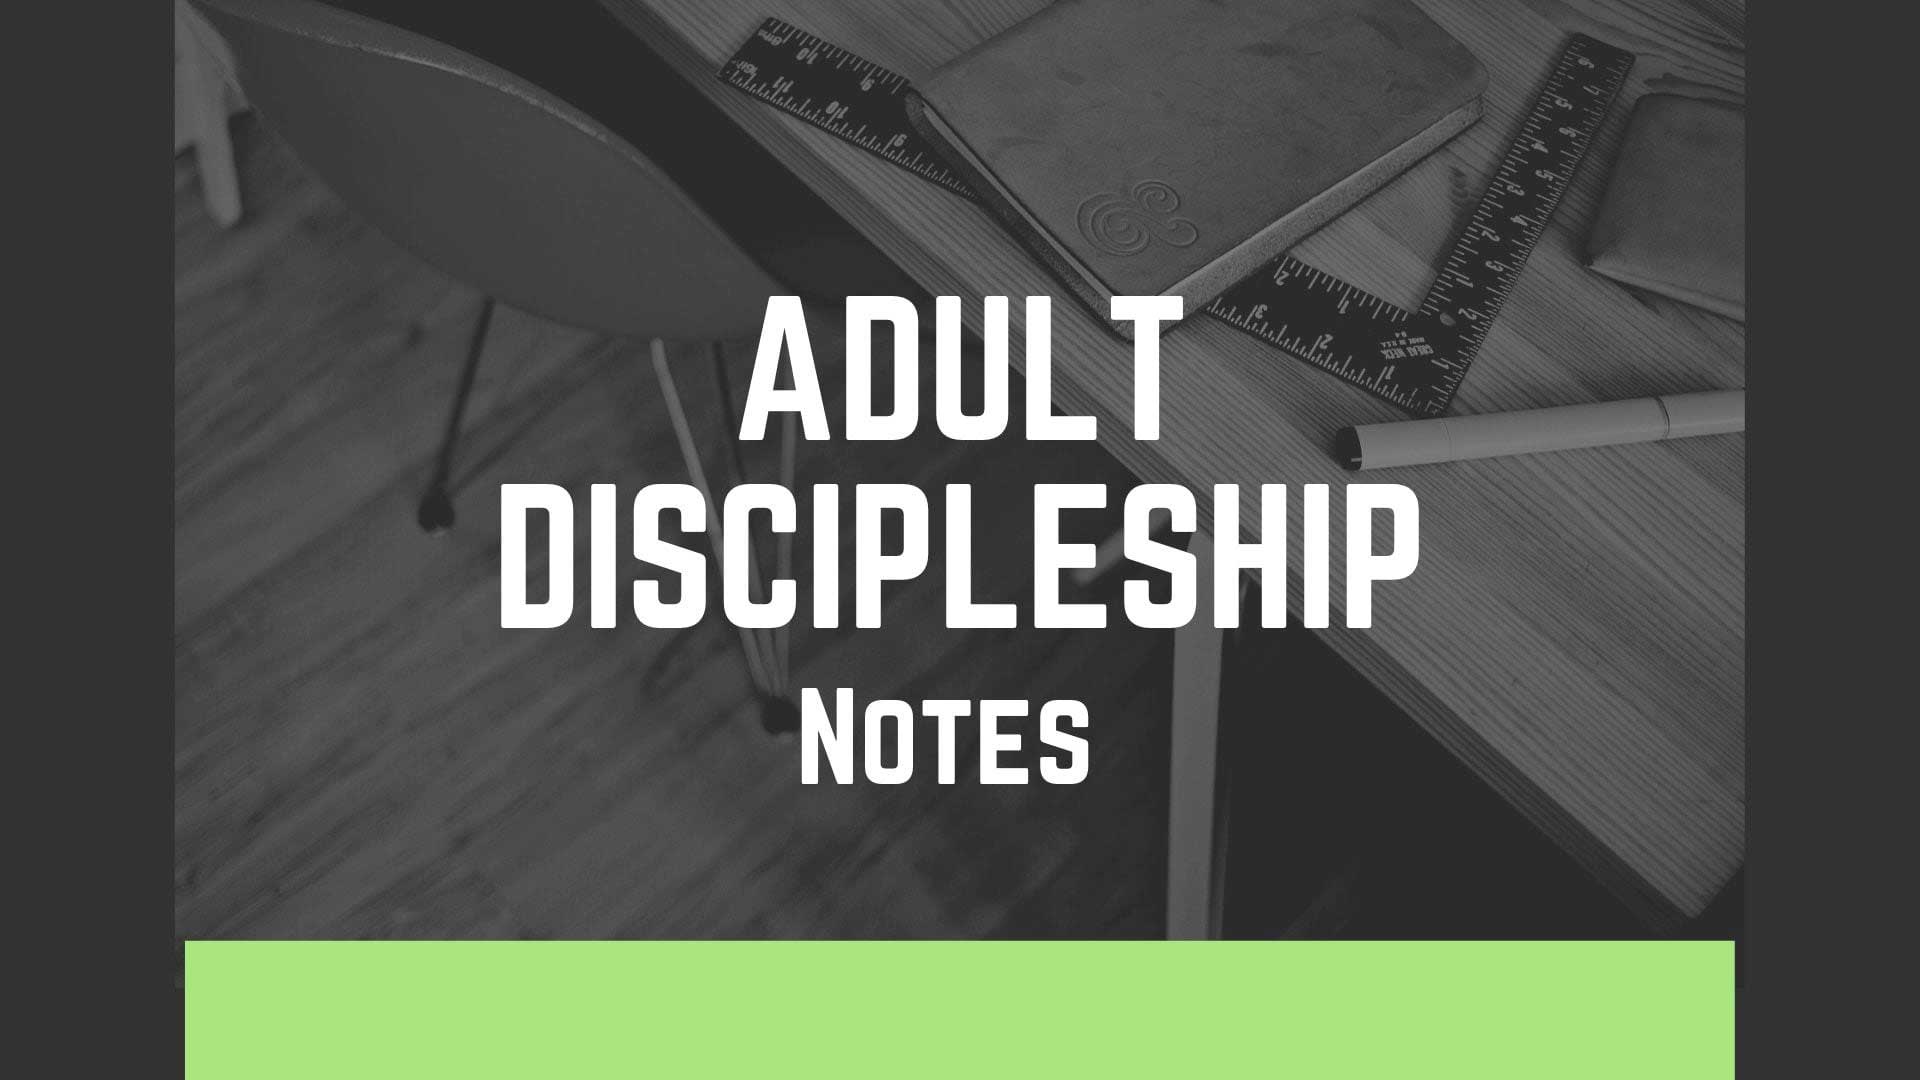 Adult Discipleship Notes hover